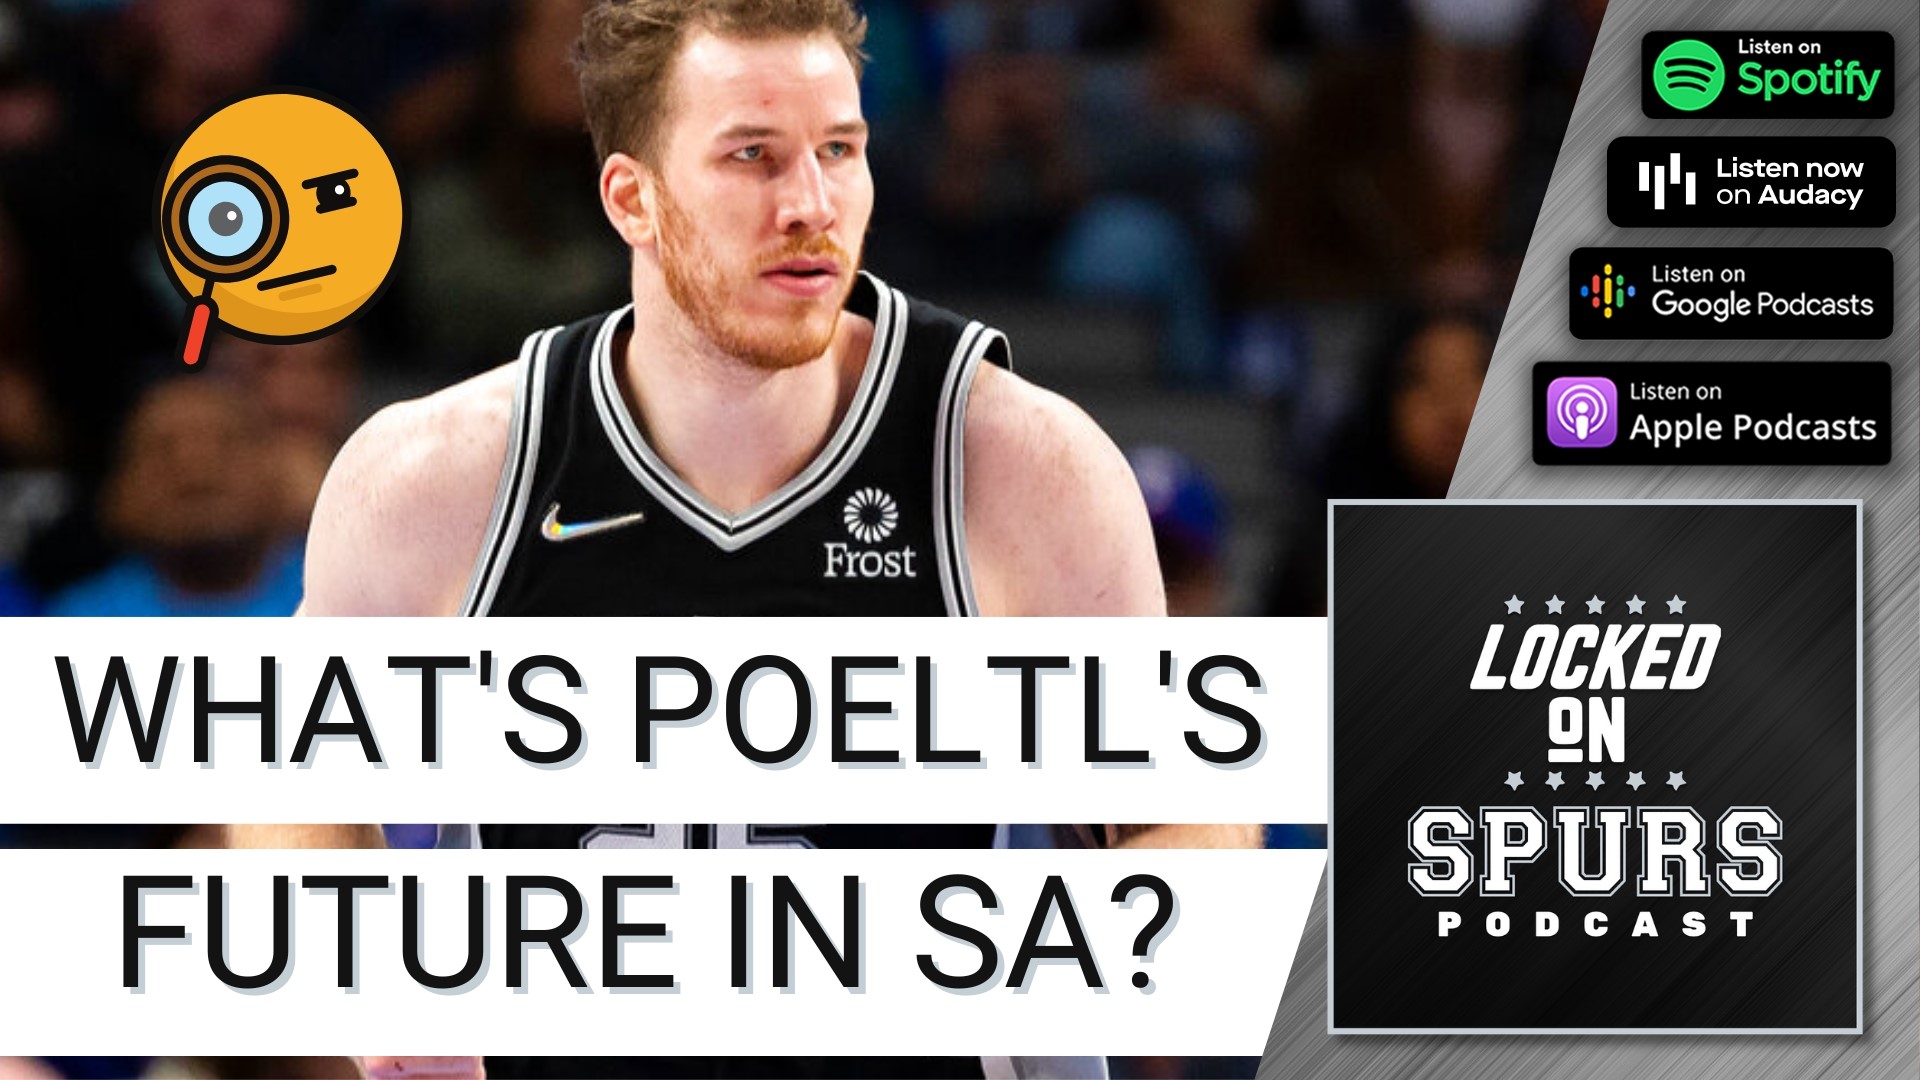 Poeltl had some interesting things to say about his future in San Antonio.